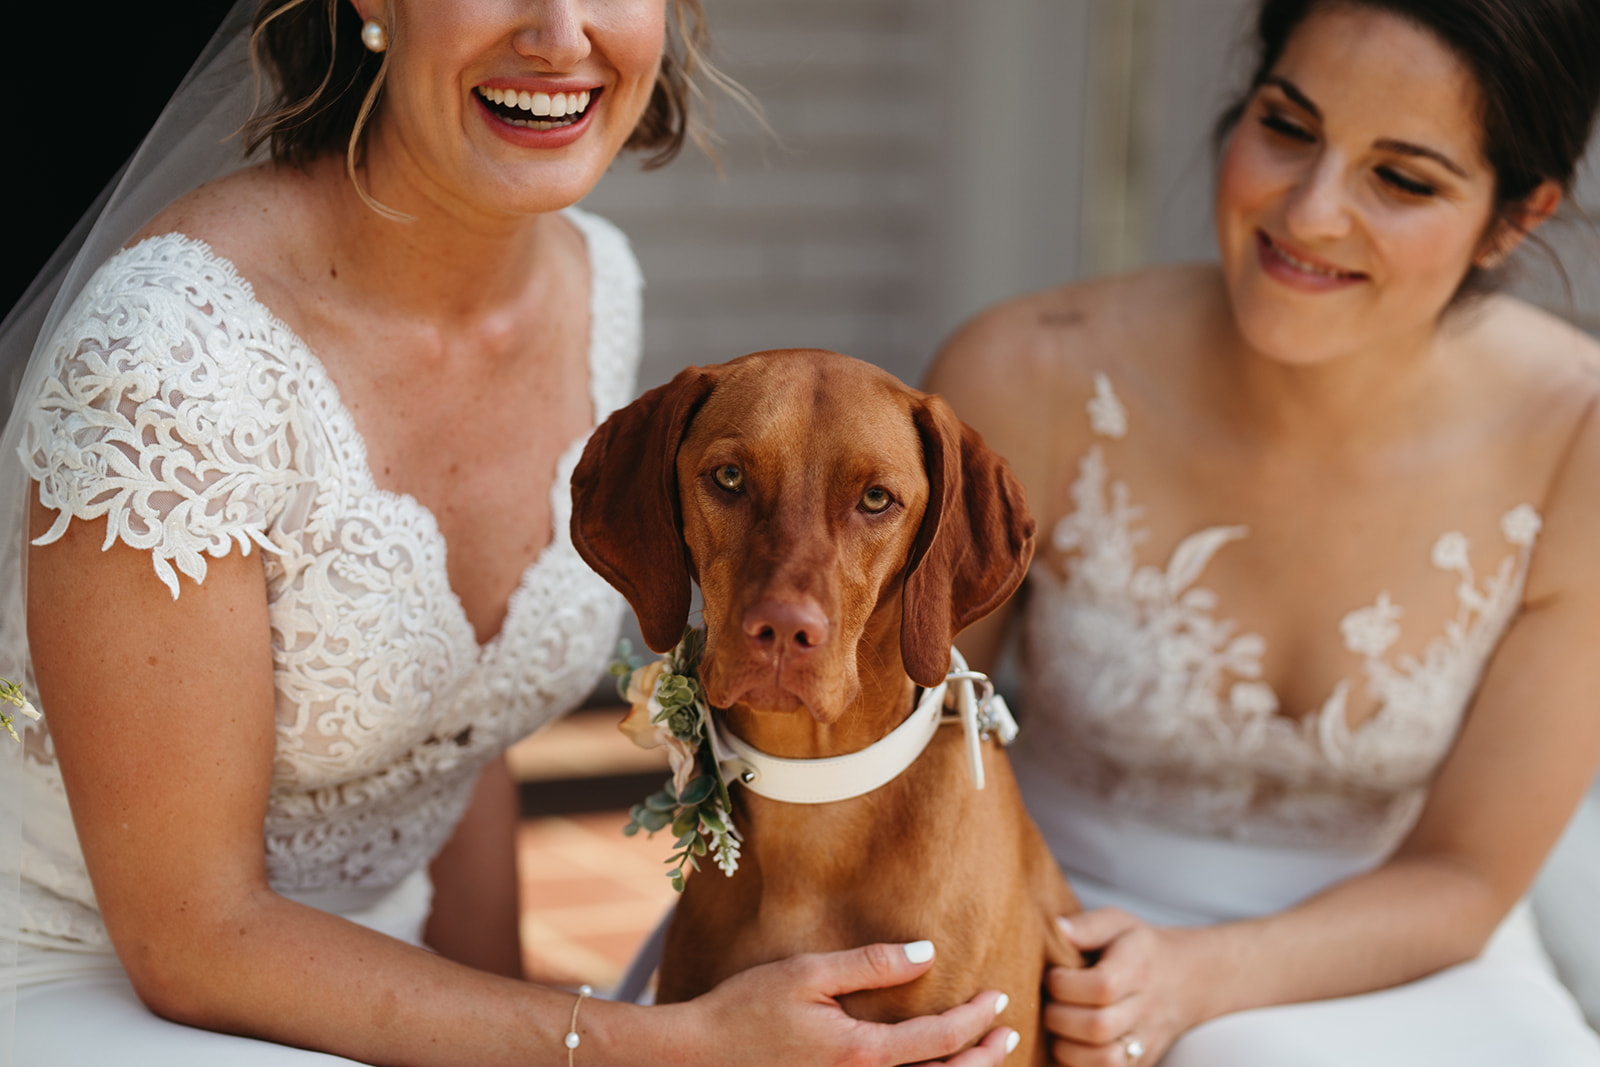 How to include your dog in wedding photos